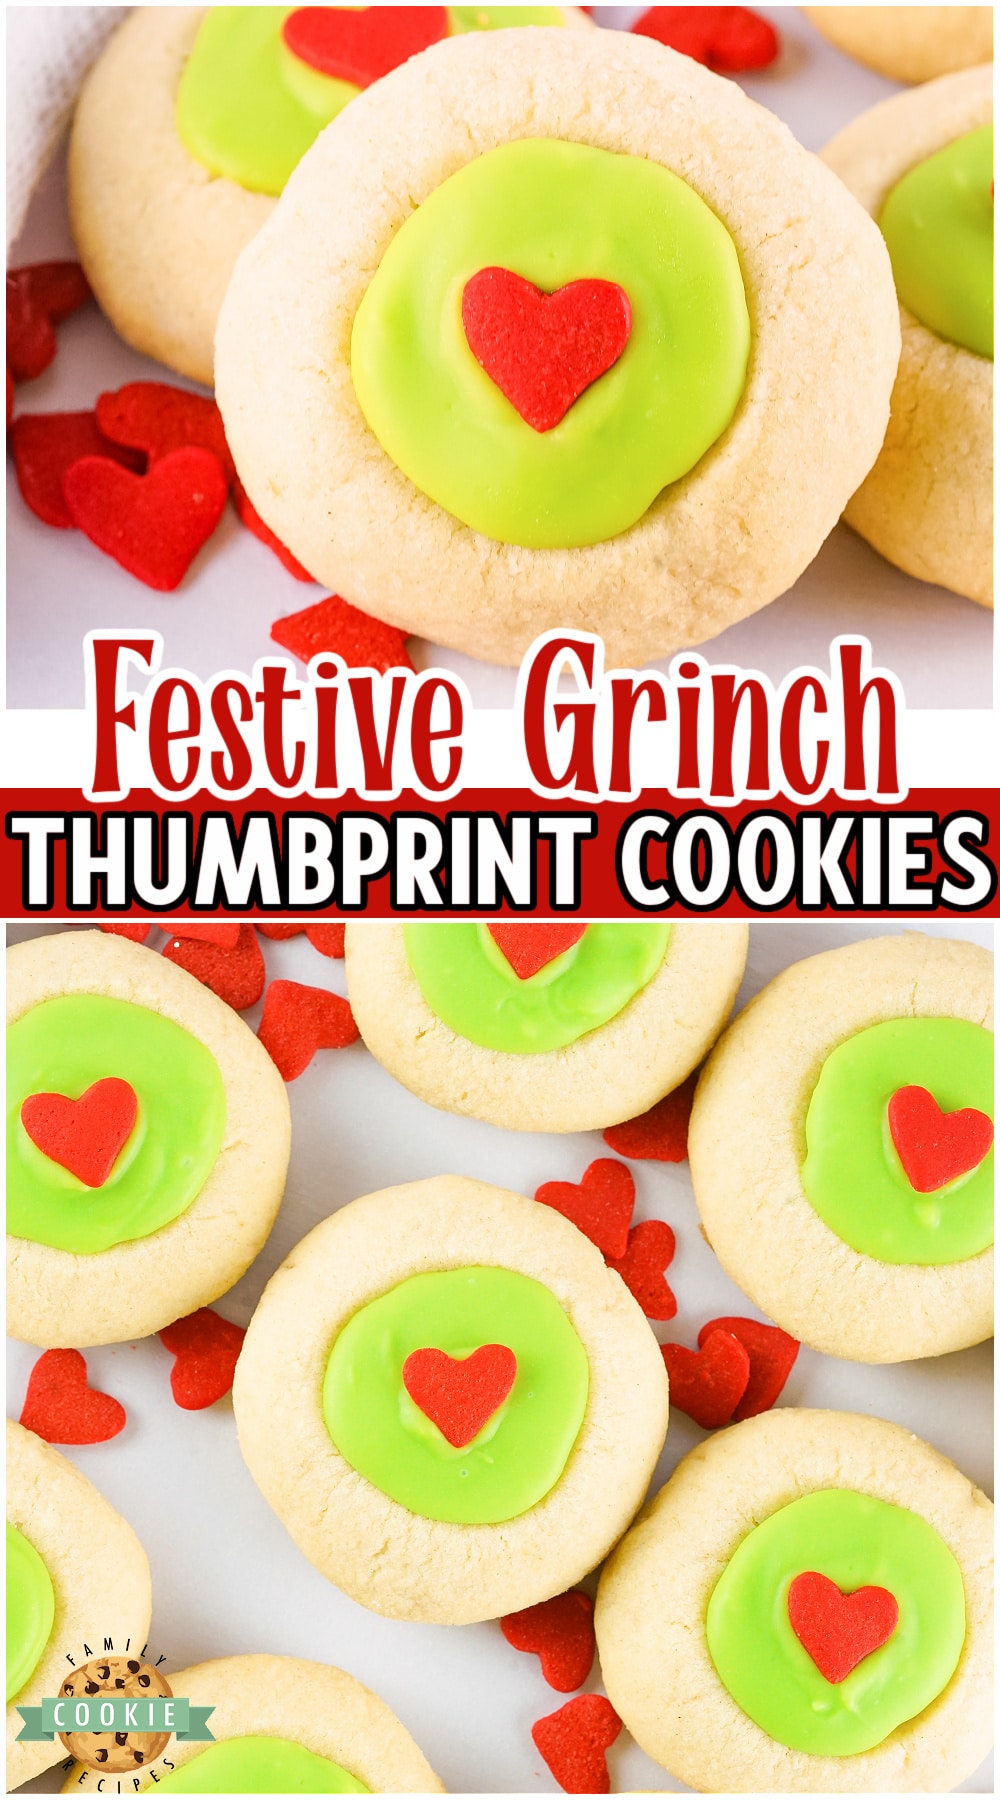 The Grinch may have stolen Christmas but these cookies will steal your hearts! Fun & Festive Grinch Thumbprint Cookies made with green chocolate filling & topped with a red heart sprinkle!  via @buttergirls